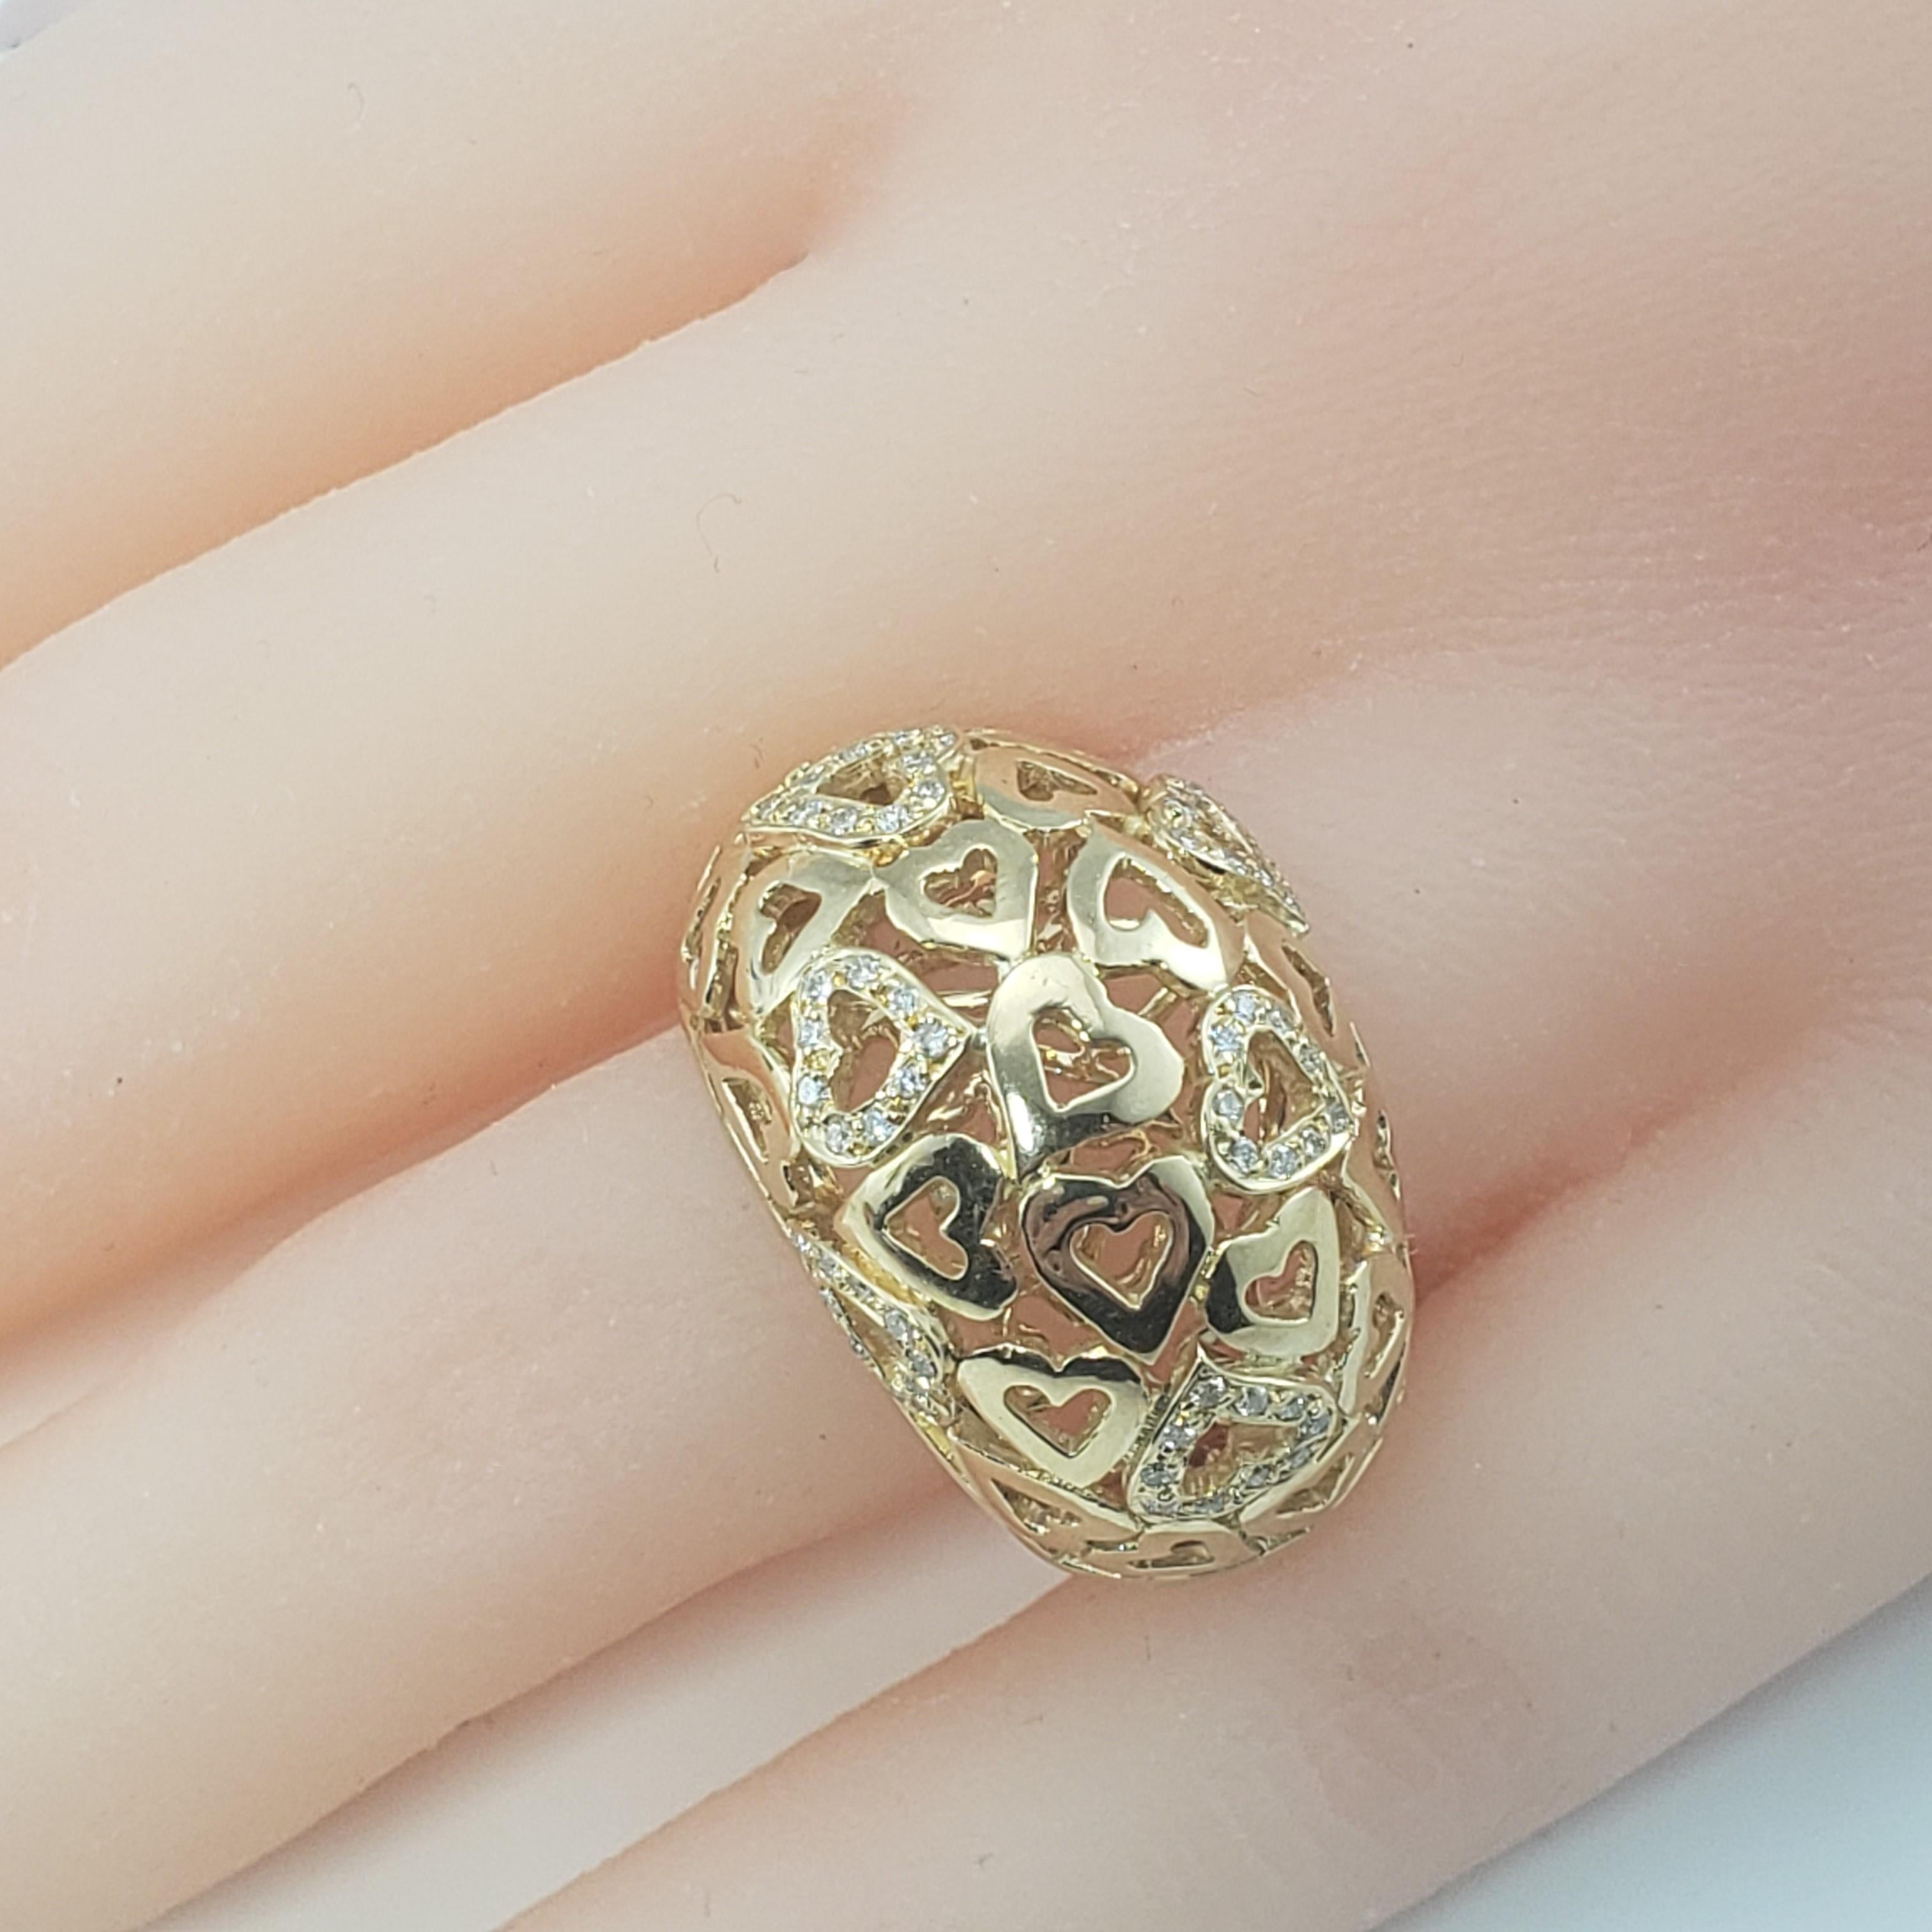 14 Karat Yellow Gold and Diamond Heart Dome Ring Size 7.25 For Sale 3